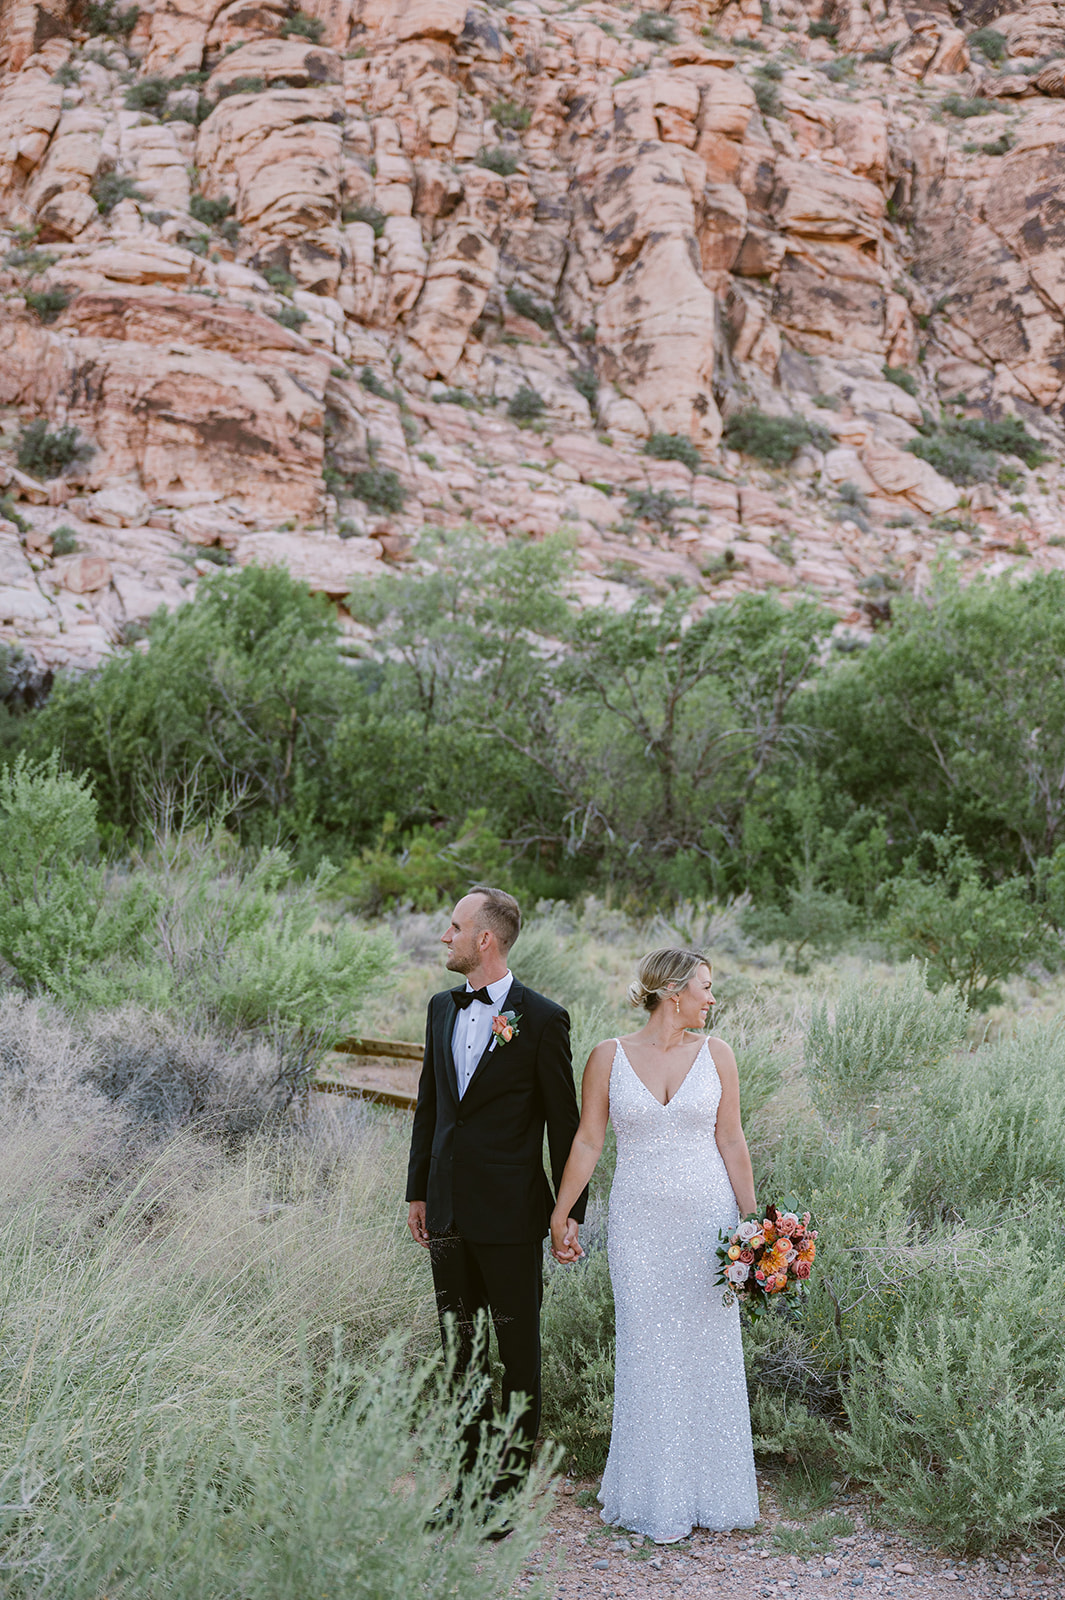 bride and groom posing on Red Rock Boardwalk with Red Rock Canyon backdrop. Bride wearing glittering white dress.